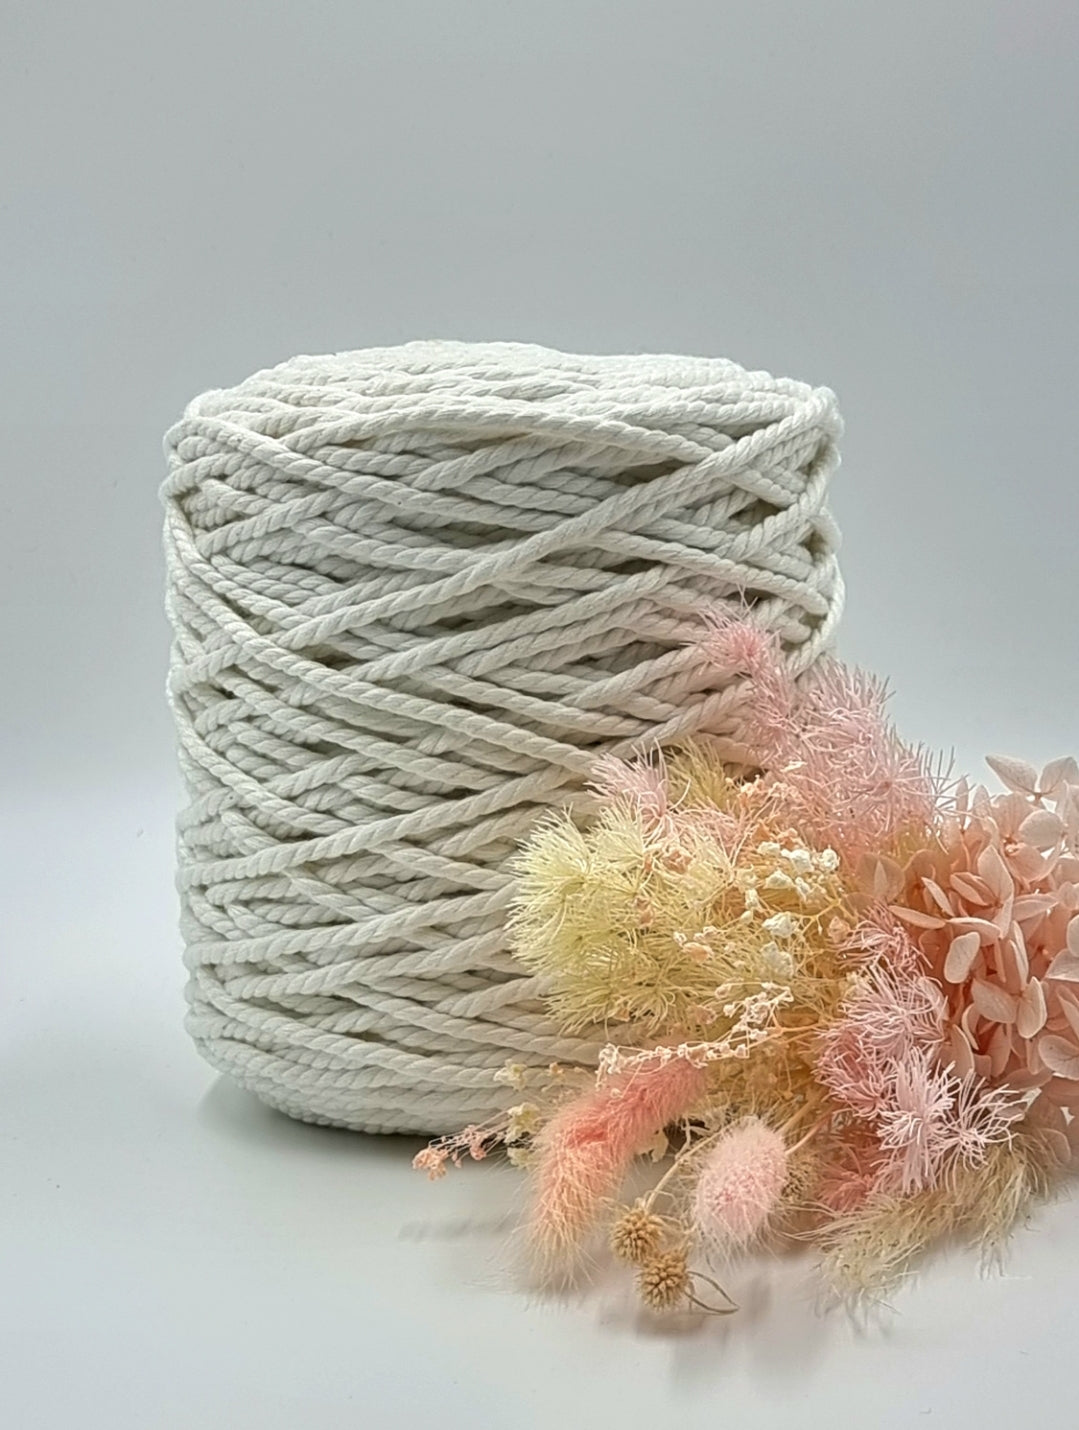 Snow White 3 Strand Macrame Cord - 3MM 3 Strand Luxe Cotton String 1KG Stardust Melbourne